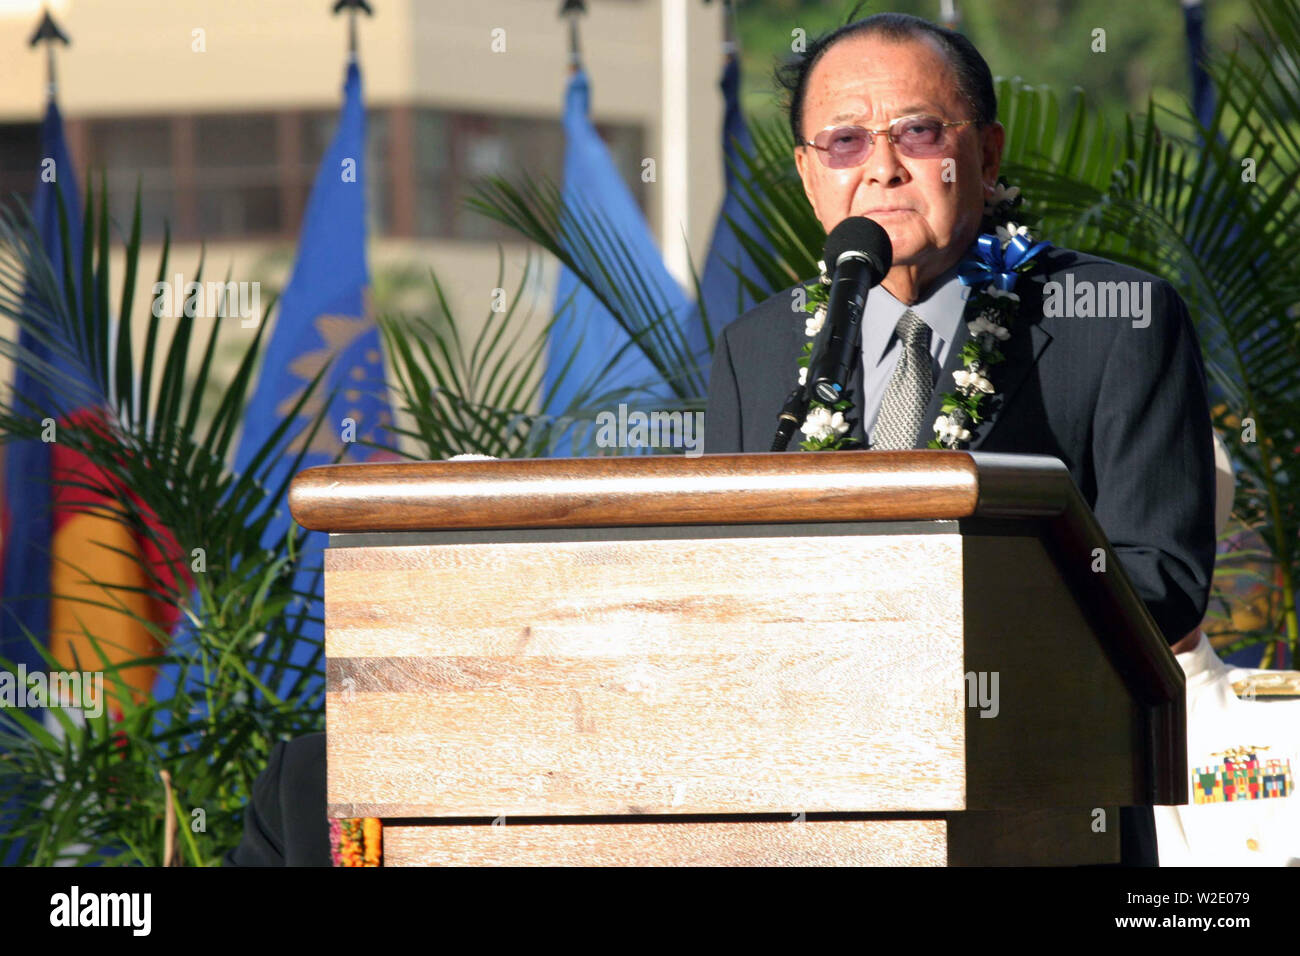 The Honorable Daniel K. Inouye, Senator of Hawaii, gives a speech during the dedication ceremony of the newly built Nimitz-MacArthur Pacific Command Center (NMPCC) at Camp H. M. Smith, Hawaii, Apr. 14, 2004.  The new center is named in honor of Adm. Chester Nimitz and U.S. Army Douglas MacArthur and is one of the nation's premier facilities for Command, Control, Communications, Computers and Intelligence (C4I) systems. Stock Photo